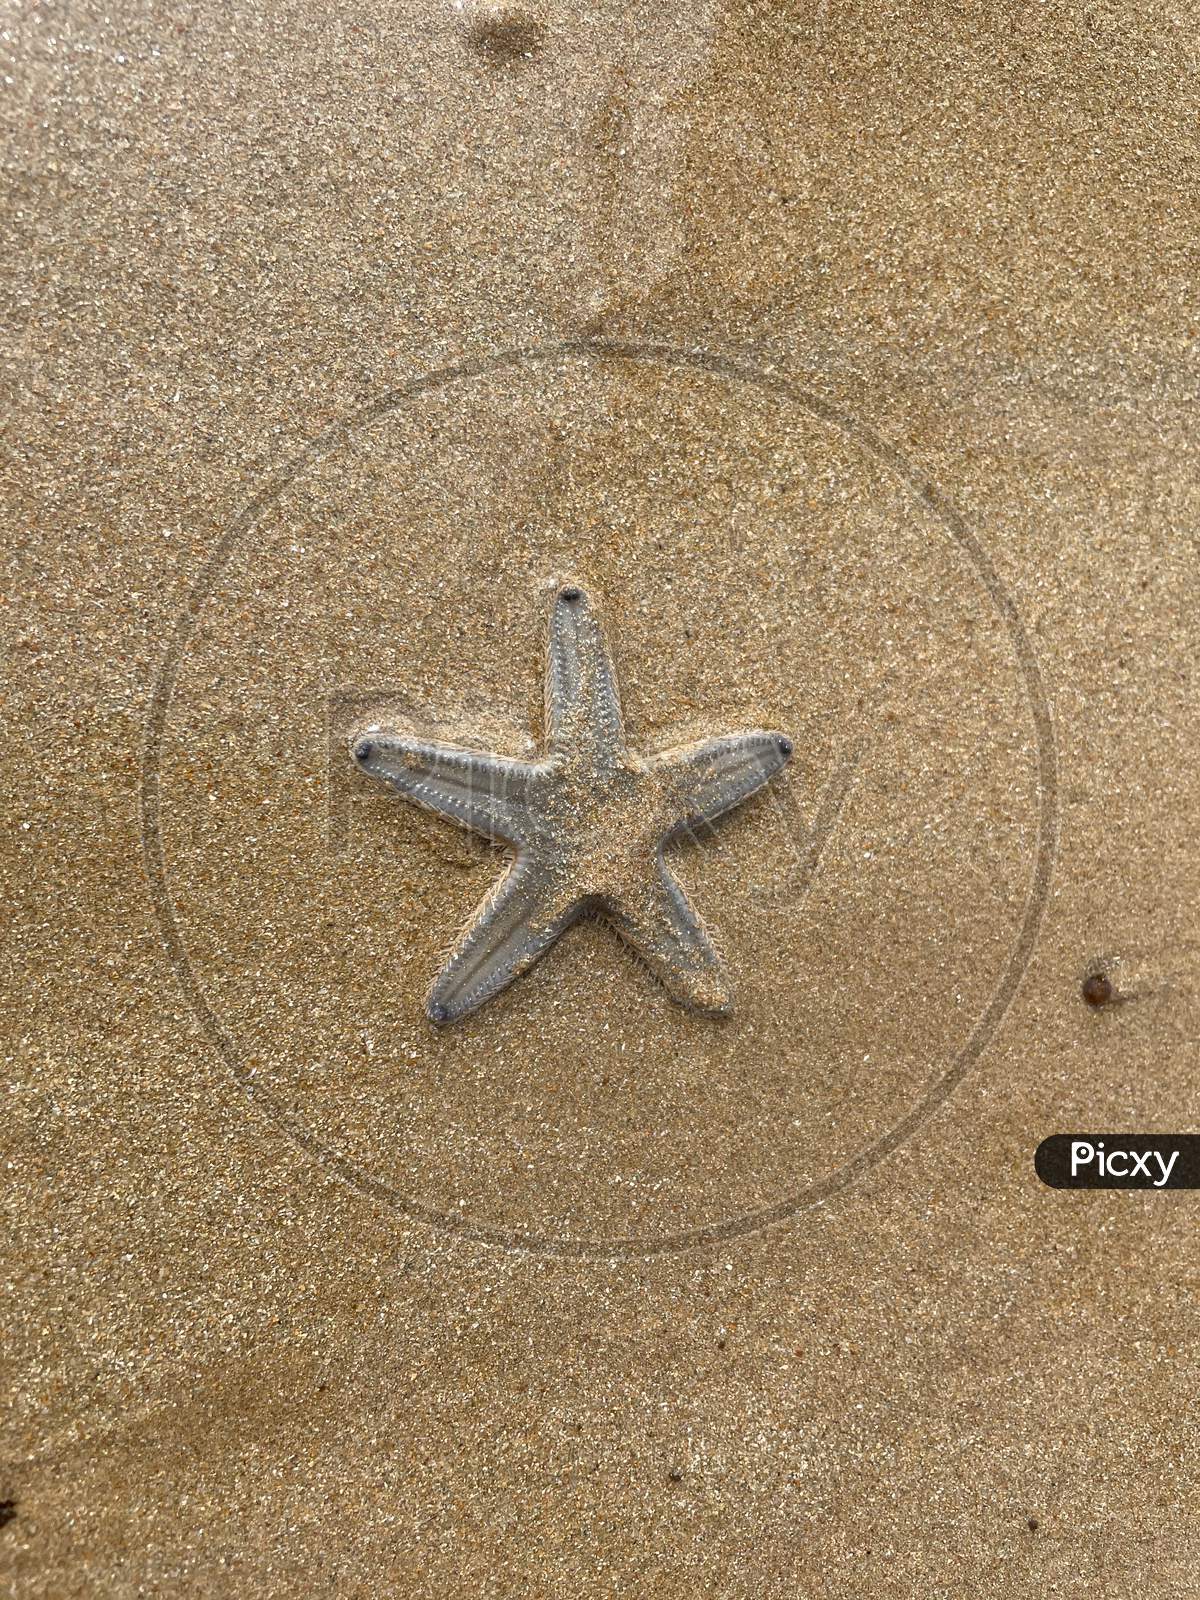 Starfish in the sand